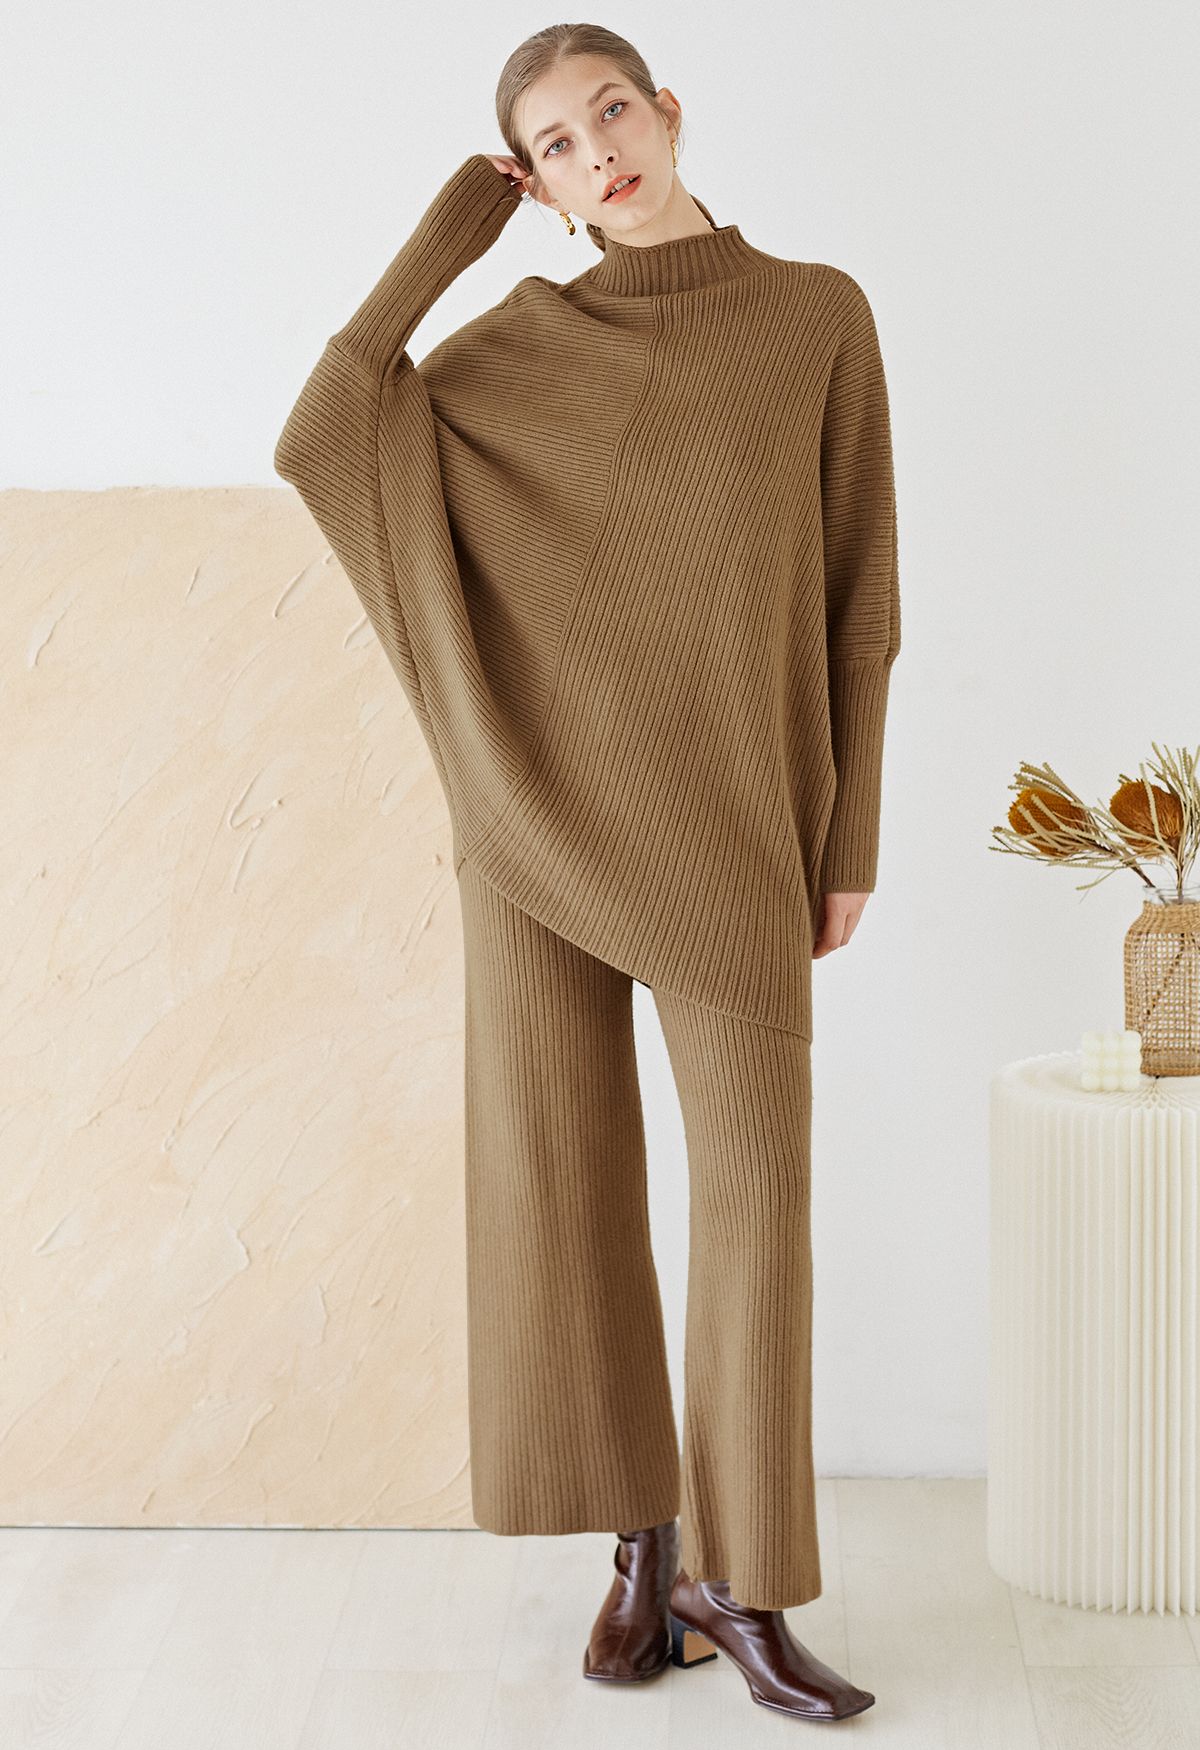 Asymmetric Batwing Sleeve Sweater and Pants Knit Set in Caramel